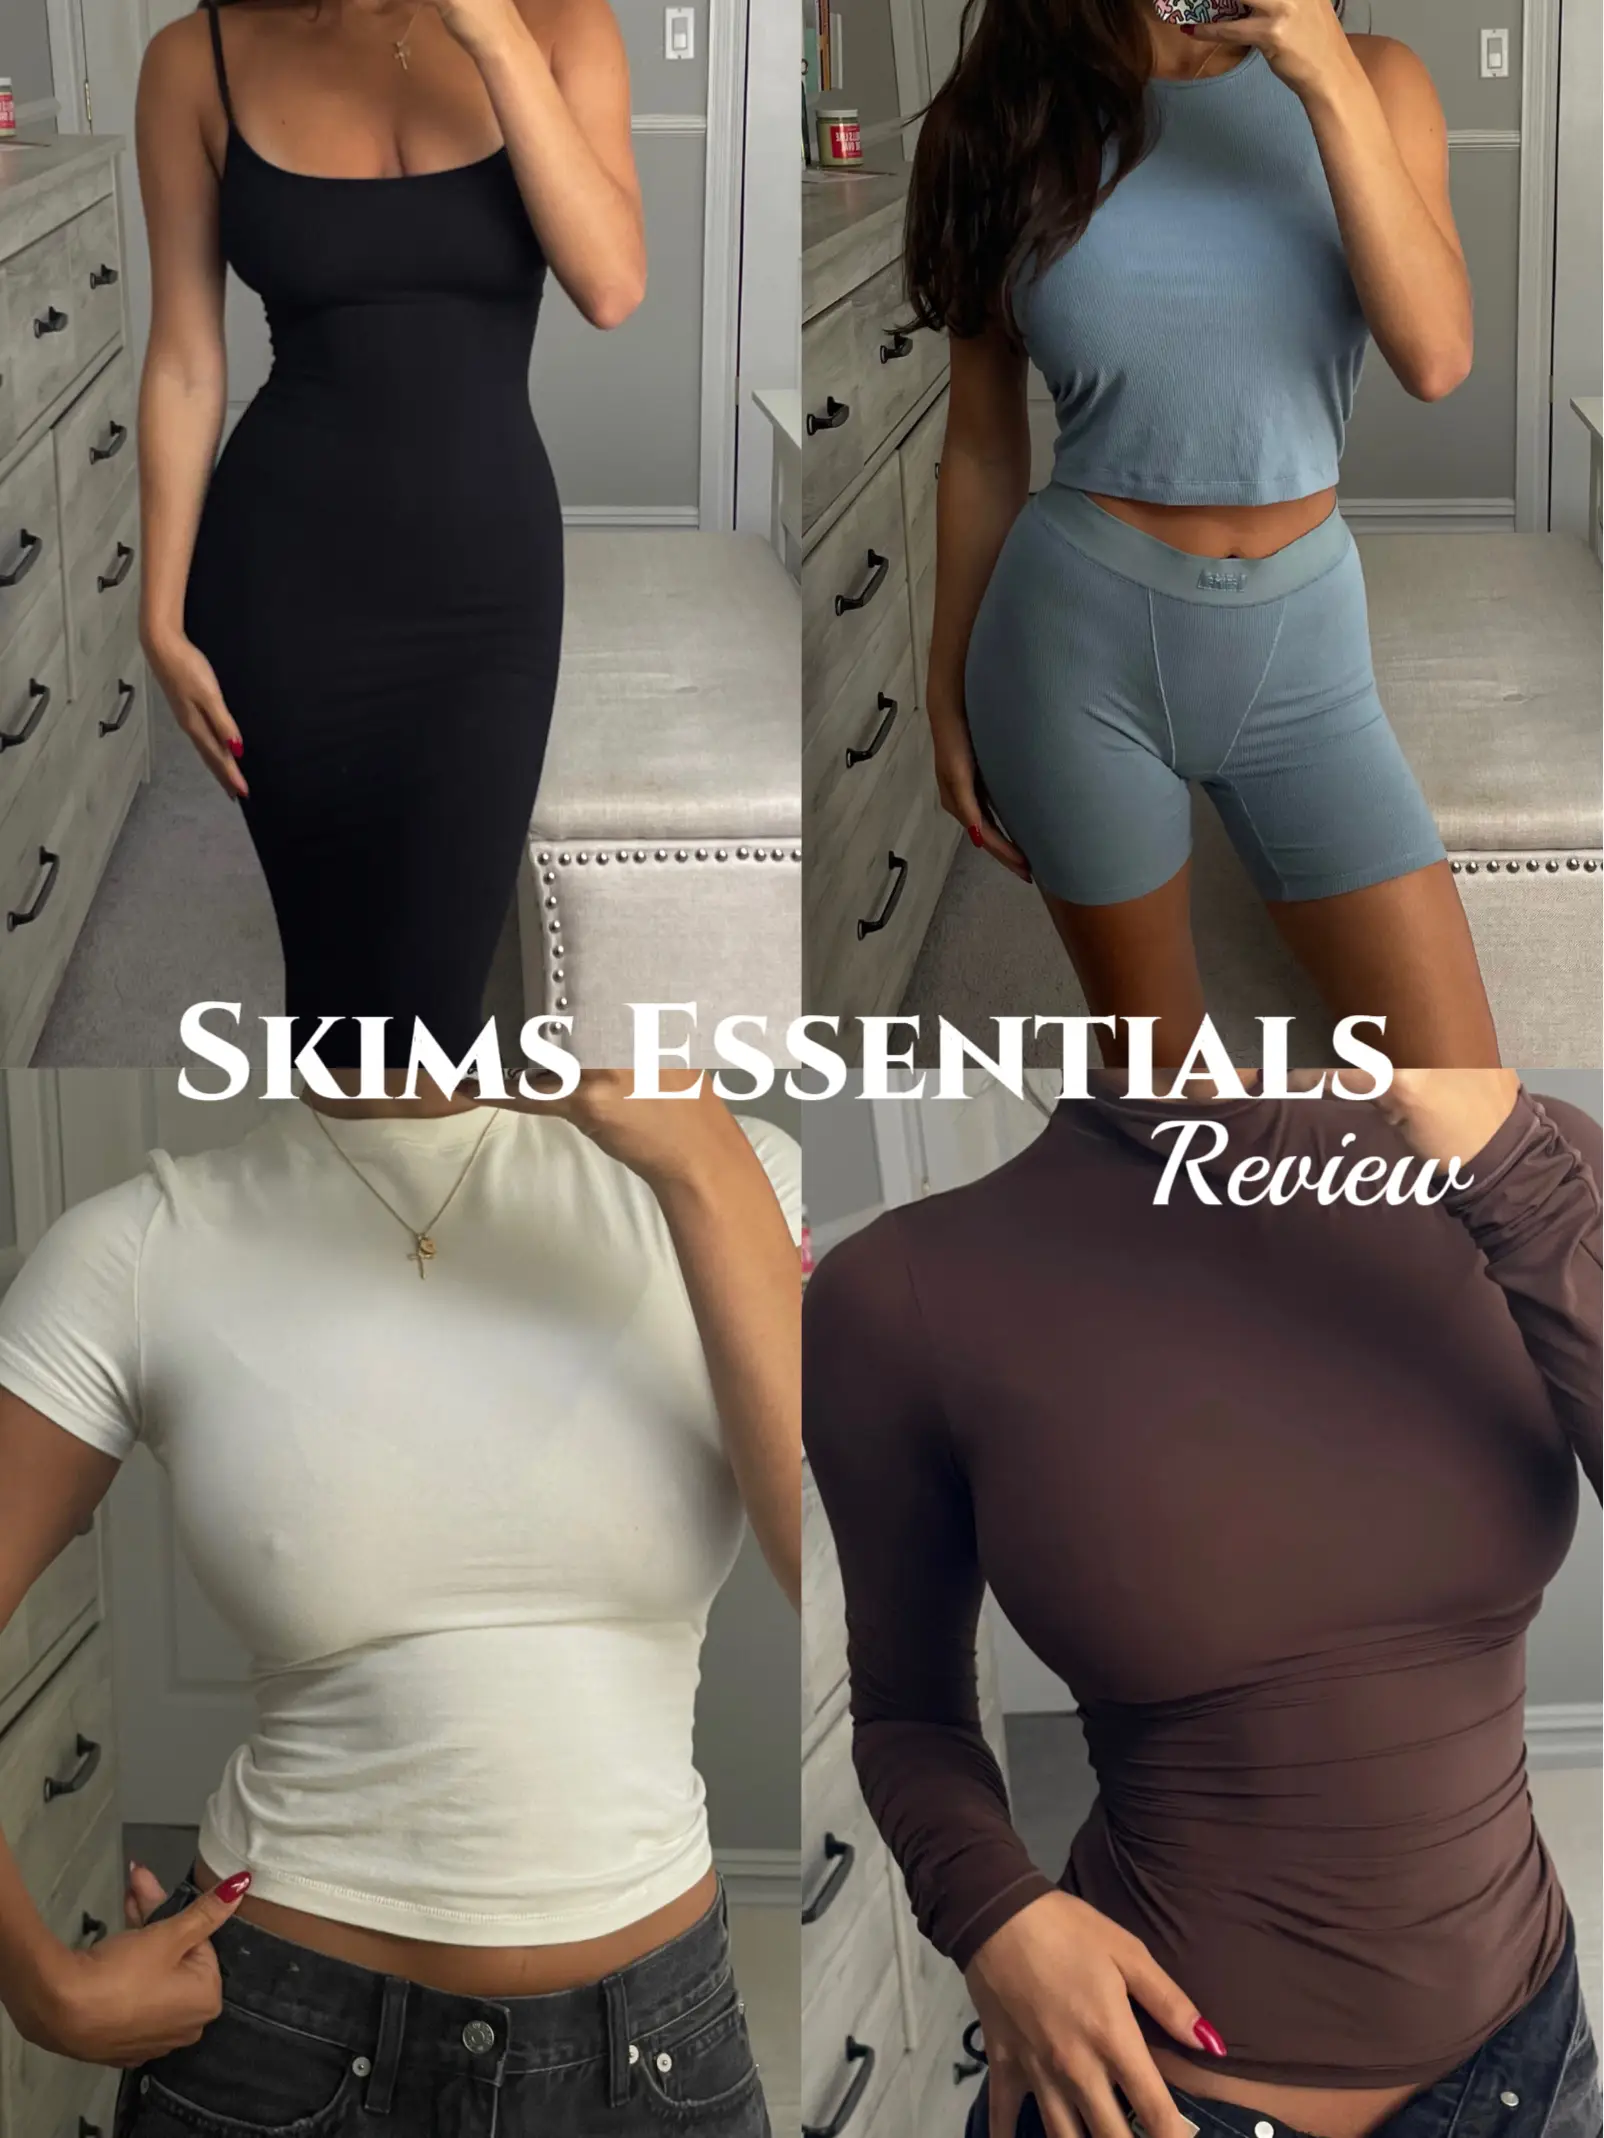 SKIMS - Designed with seamless, buttery soft fabric that molds to